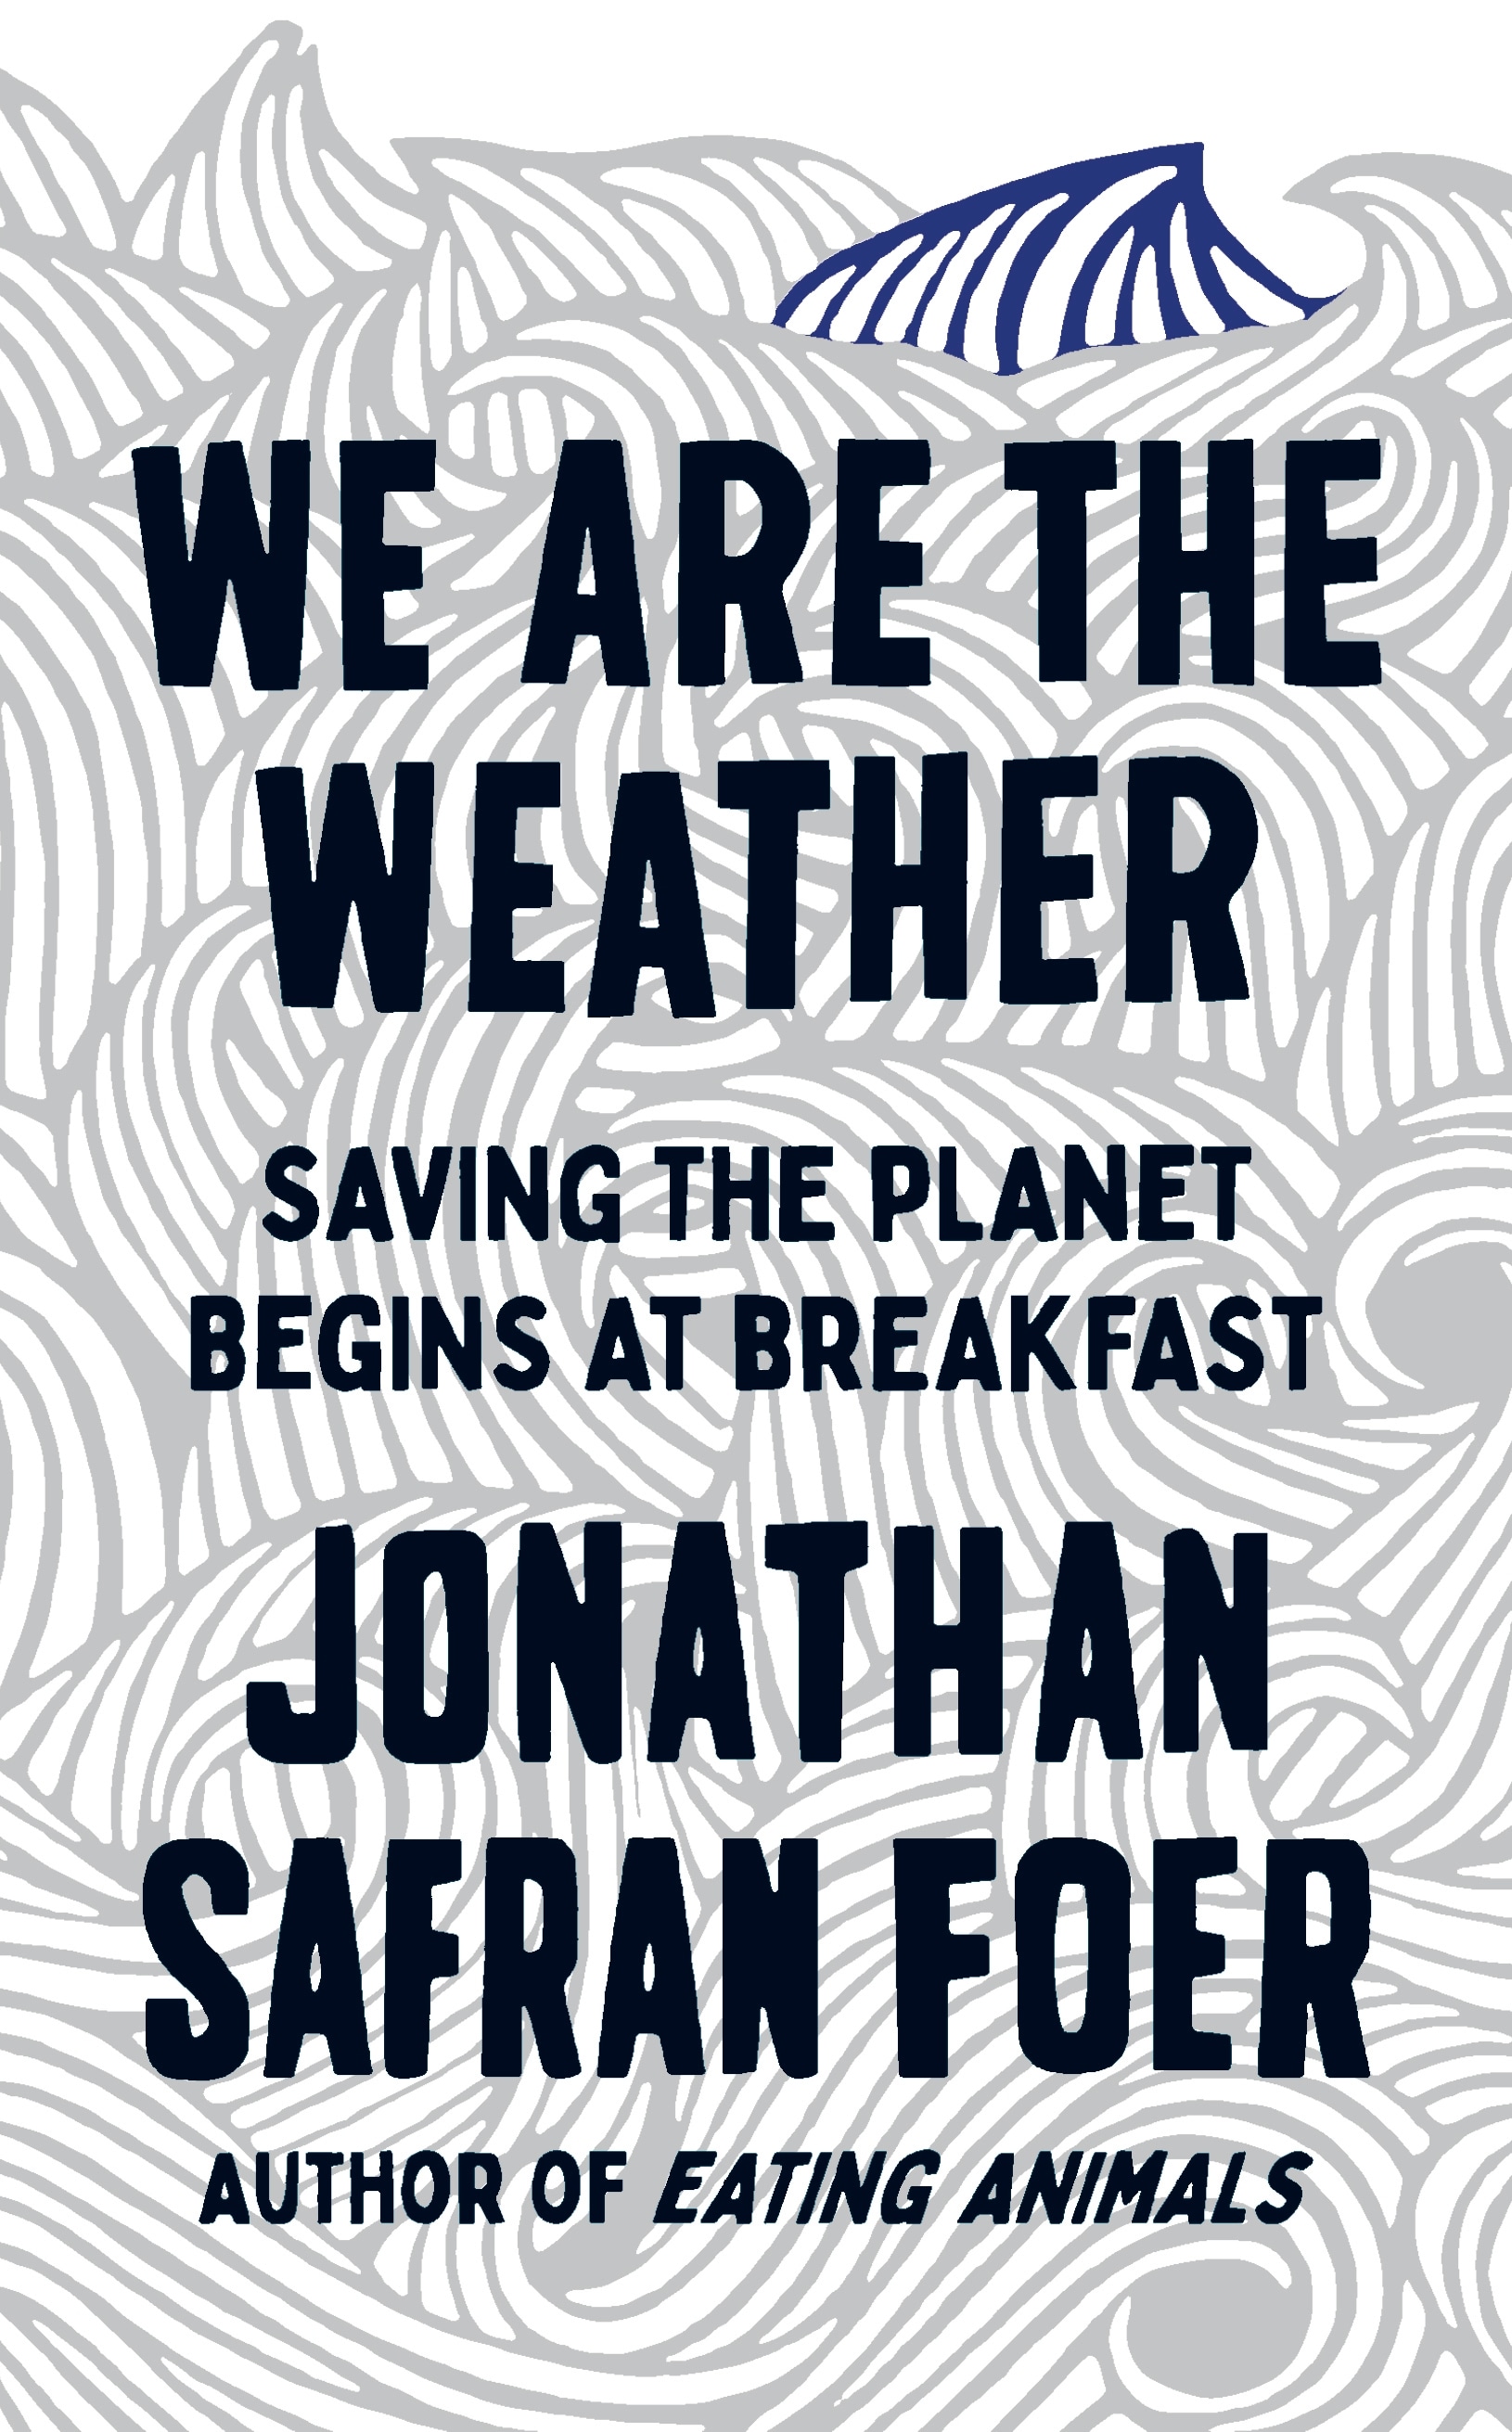 Book “We are the Weather” by Jonathan Safran Foer — October 10, 2019